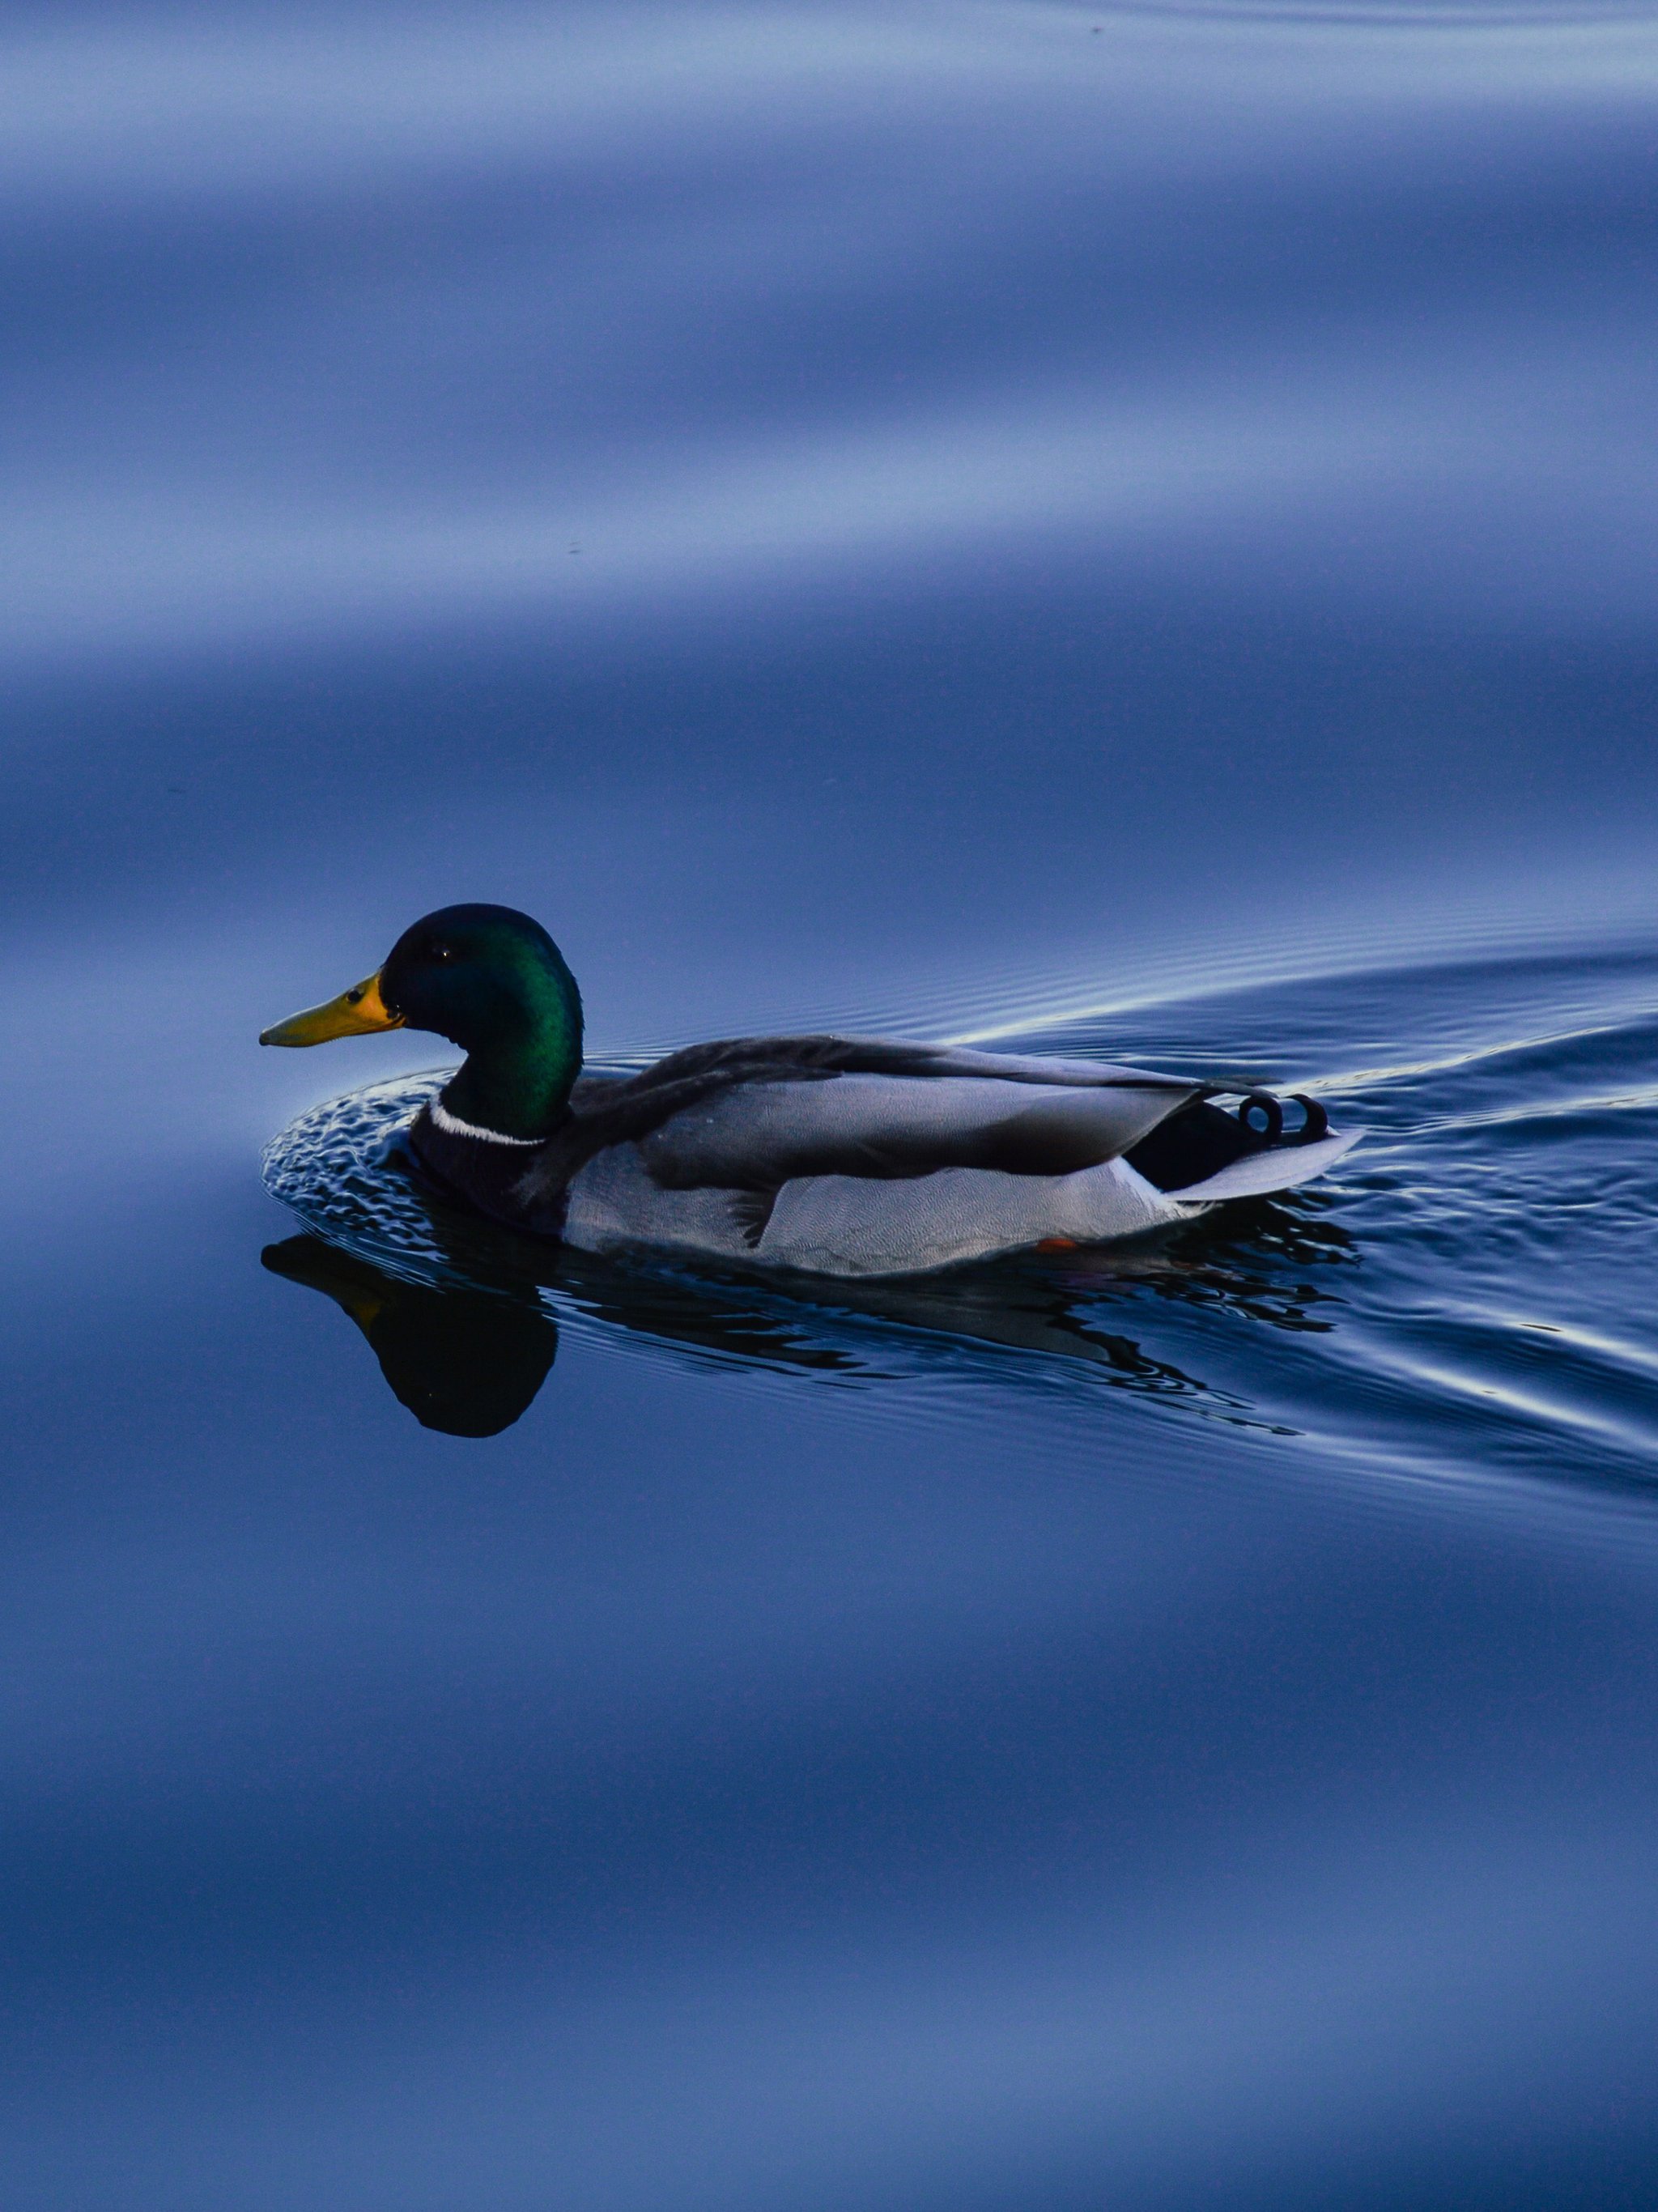 Duck on Blue Water Wallpaper - iPhone, Android & Desktop Backgrounds